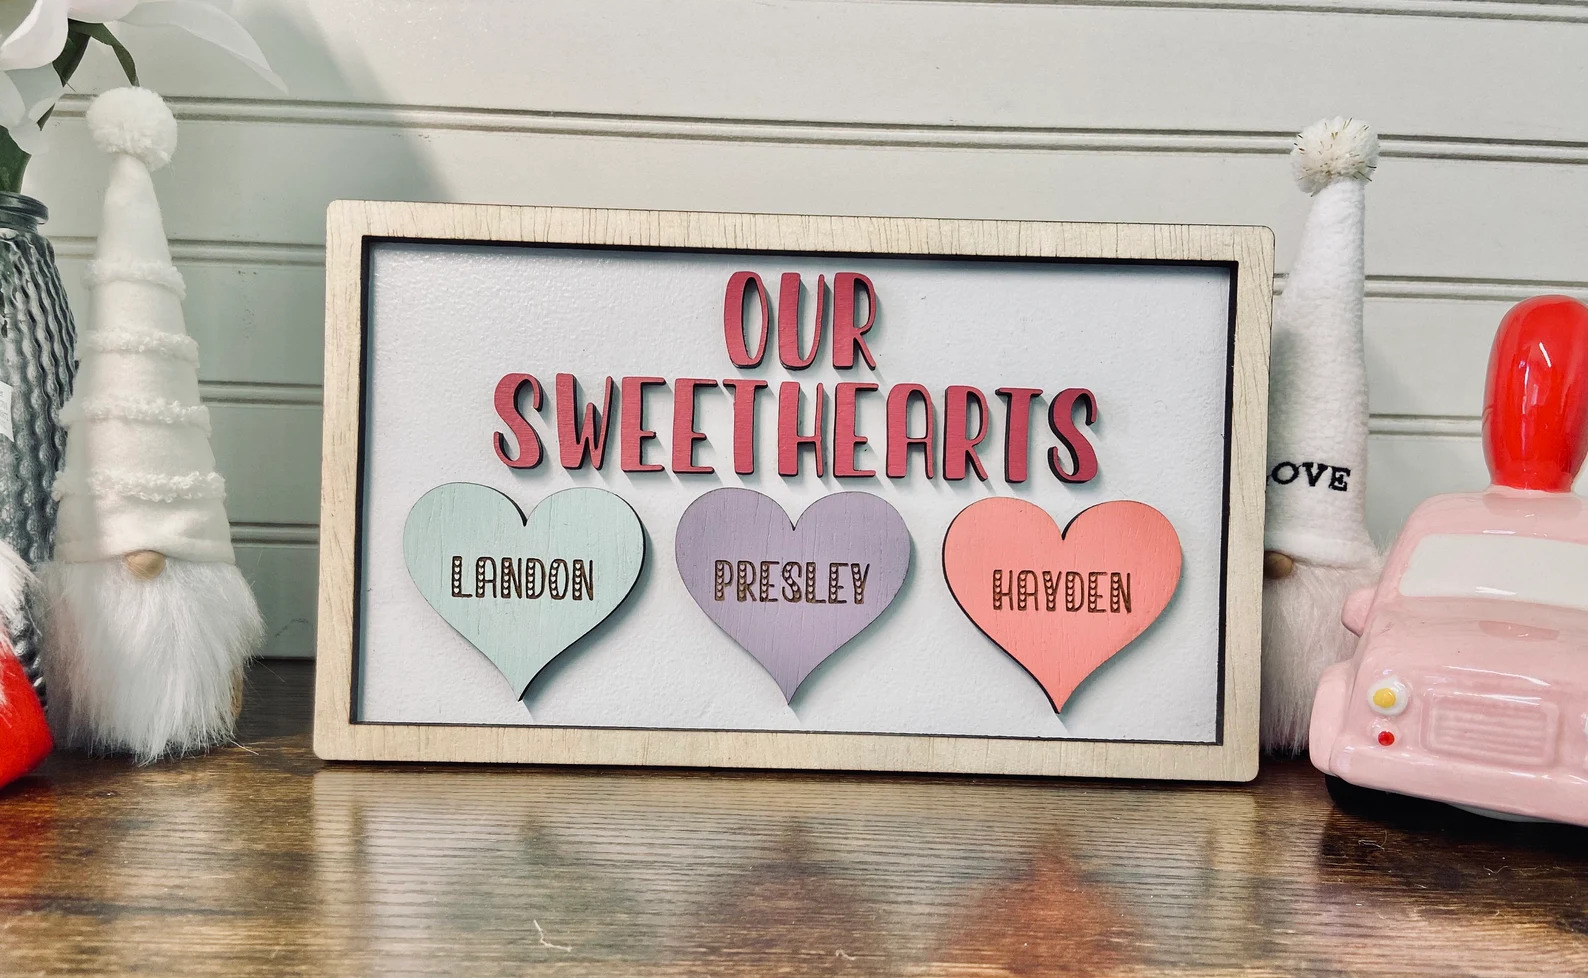 18 Wonderful Valentine's Day Sign Designs That Will Inspire Your Love